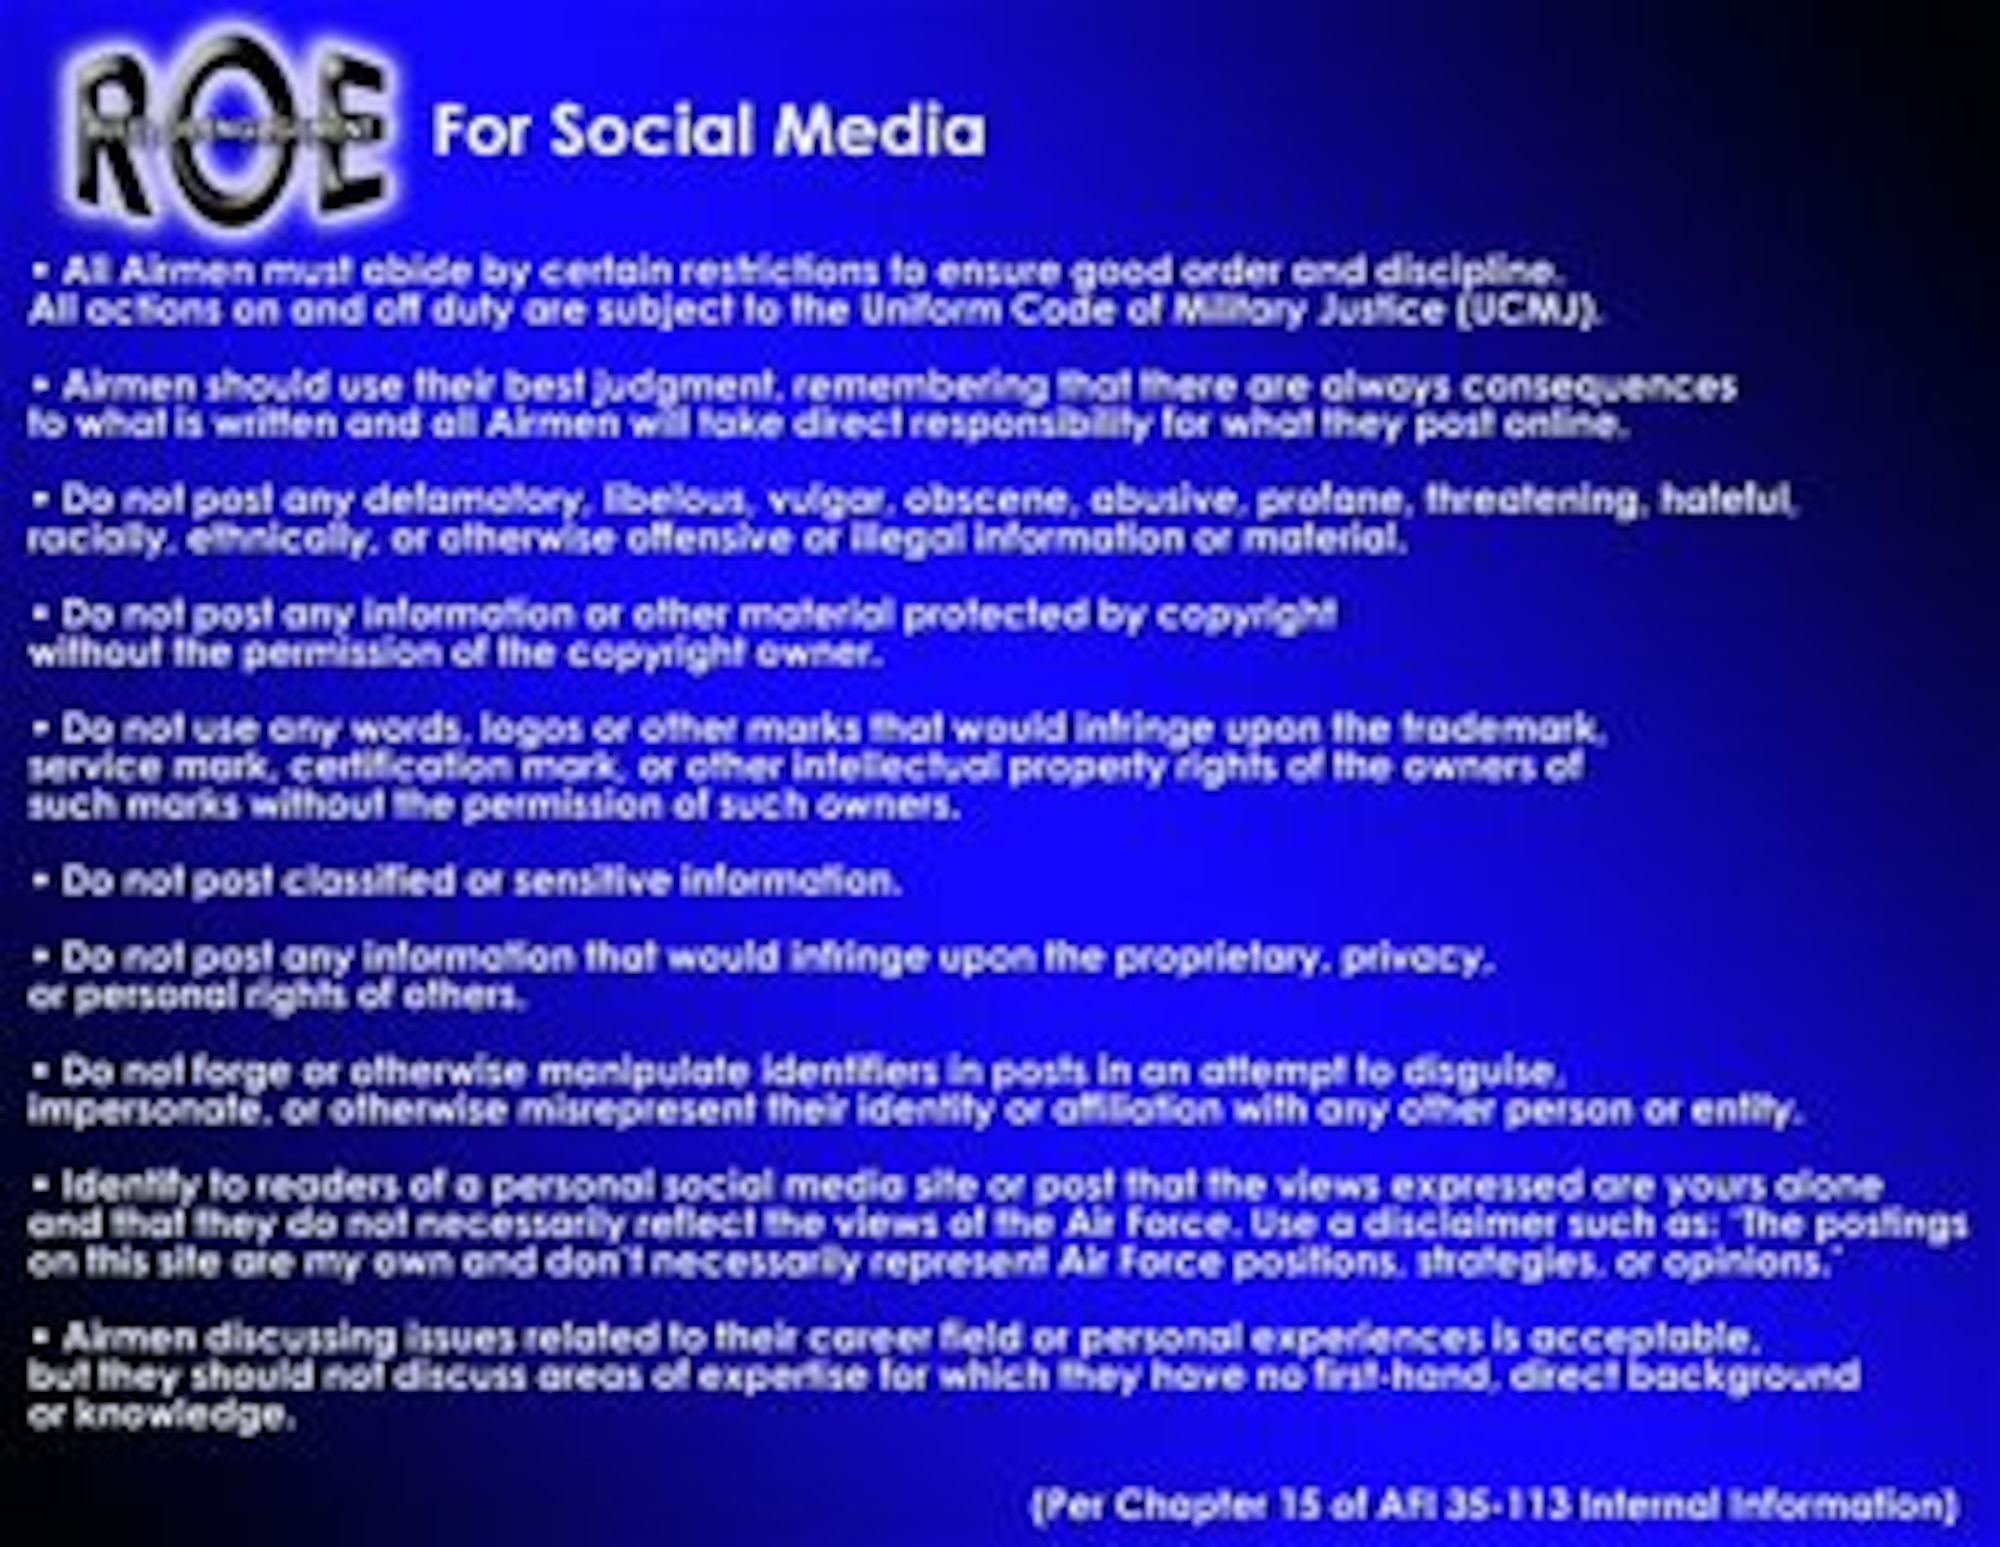 In April, Air Force personnel will be allowed to access Internet-based social media sites via the Air Force Network for official use and limited personal use. All Airmen must use due diligence when posting information online and must always follow Joint Ethics regulations, operations security and pubished rules of engagement. (U.S. Air Force graphic)